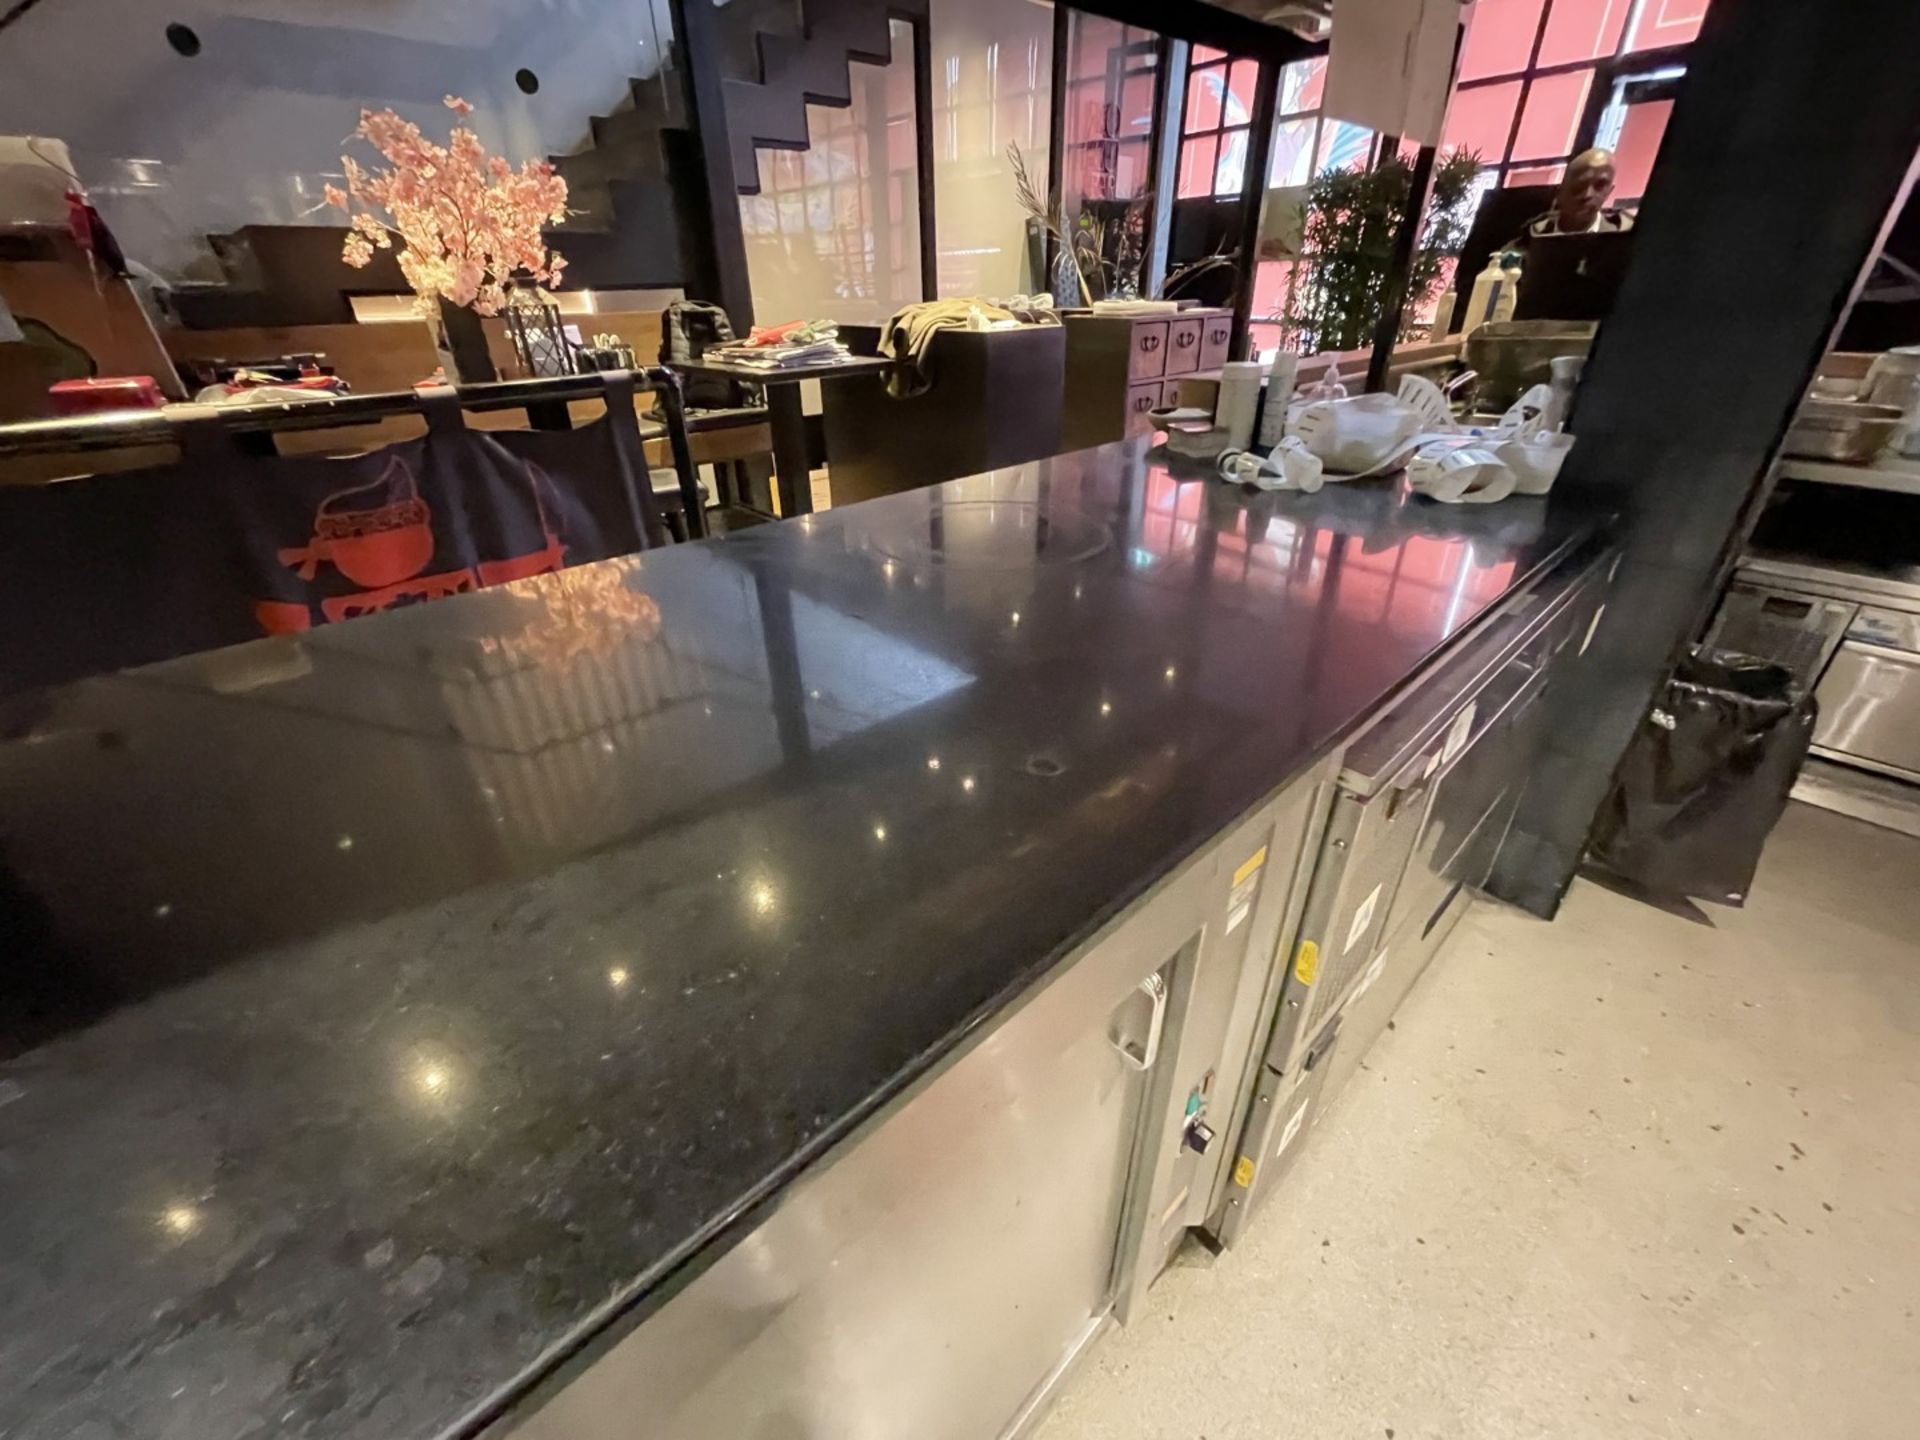 1 x Restaurant Passthrough Kitchen Counter Featuring a Large Black Corian Worksurface - Image 10 of 12